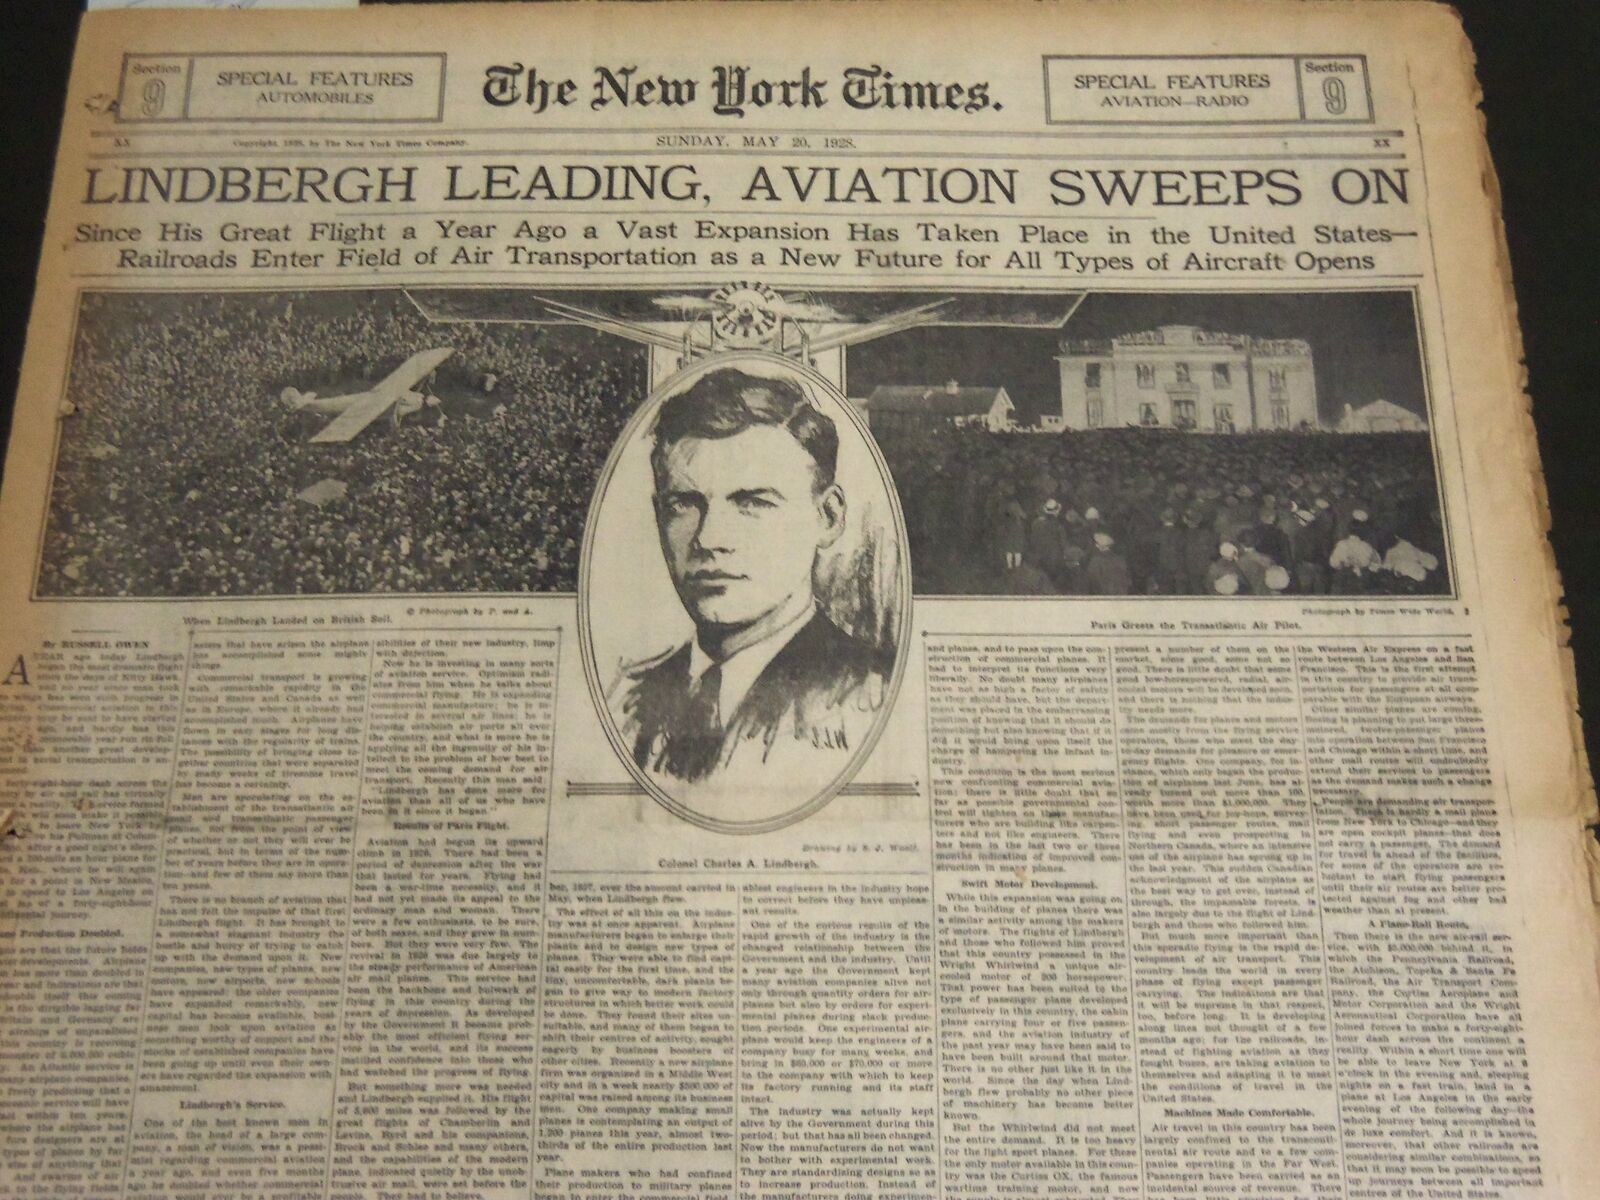 1928 MAY 20 NY TIMES SPECIAL FEATURES LINDBERGH LEADING AVIATION SWEEPS- NT 7078